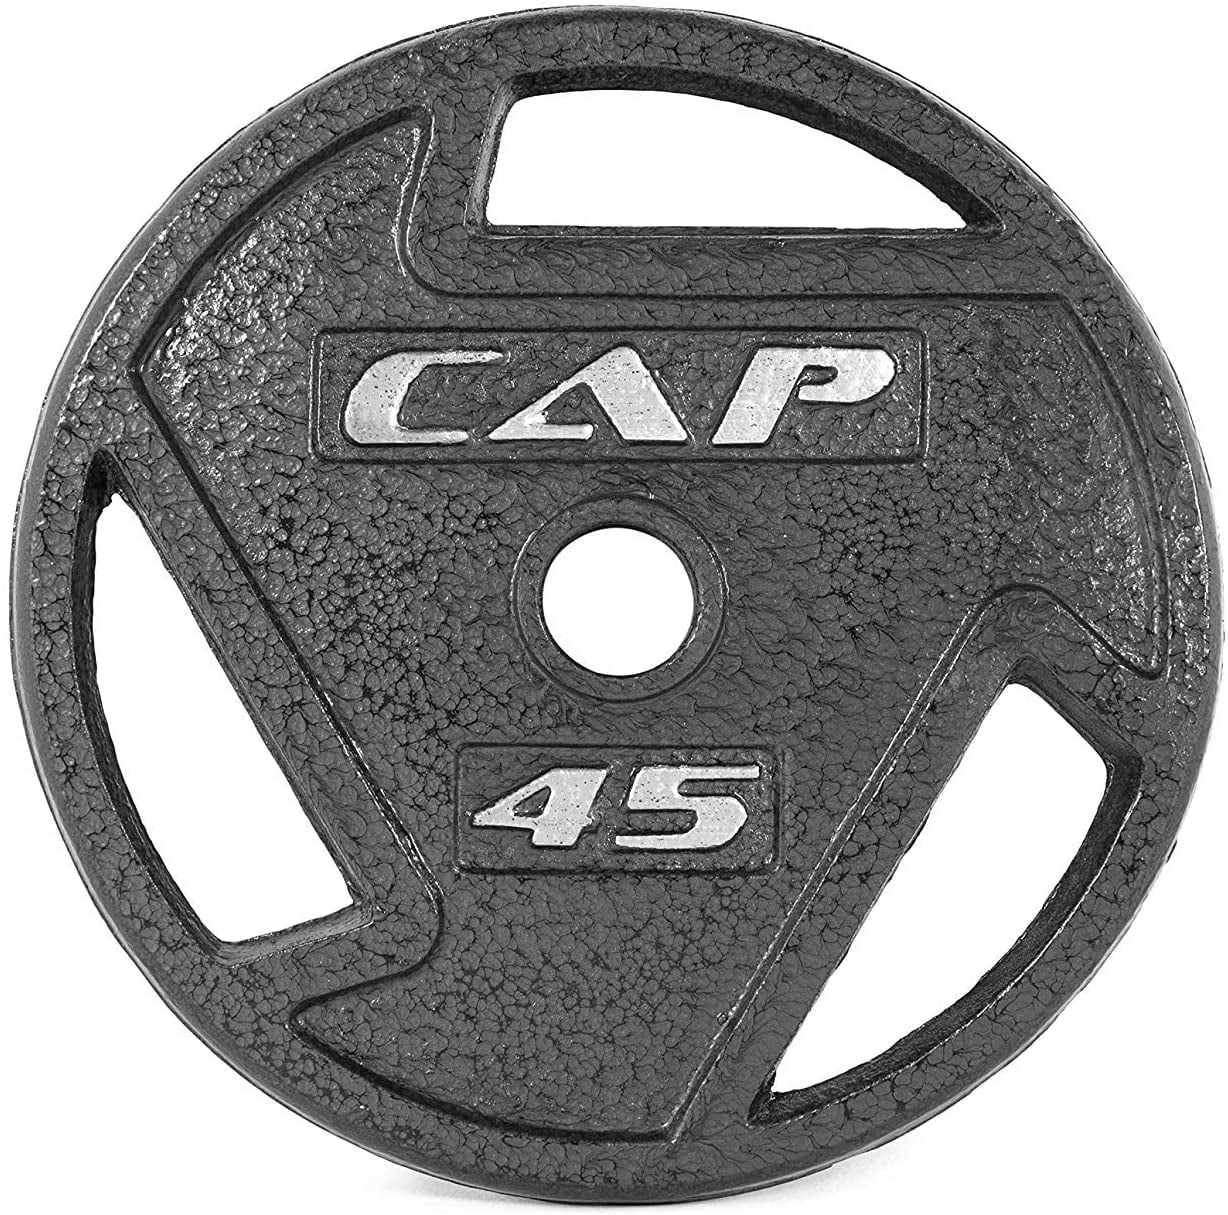 New CAP 50lb Olympic Weight Plate Set FOUR 10 lb Plates TWO 5lb Plates FREE SHIP 